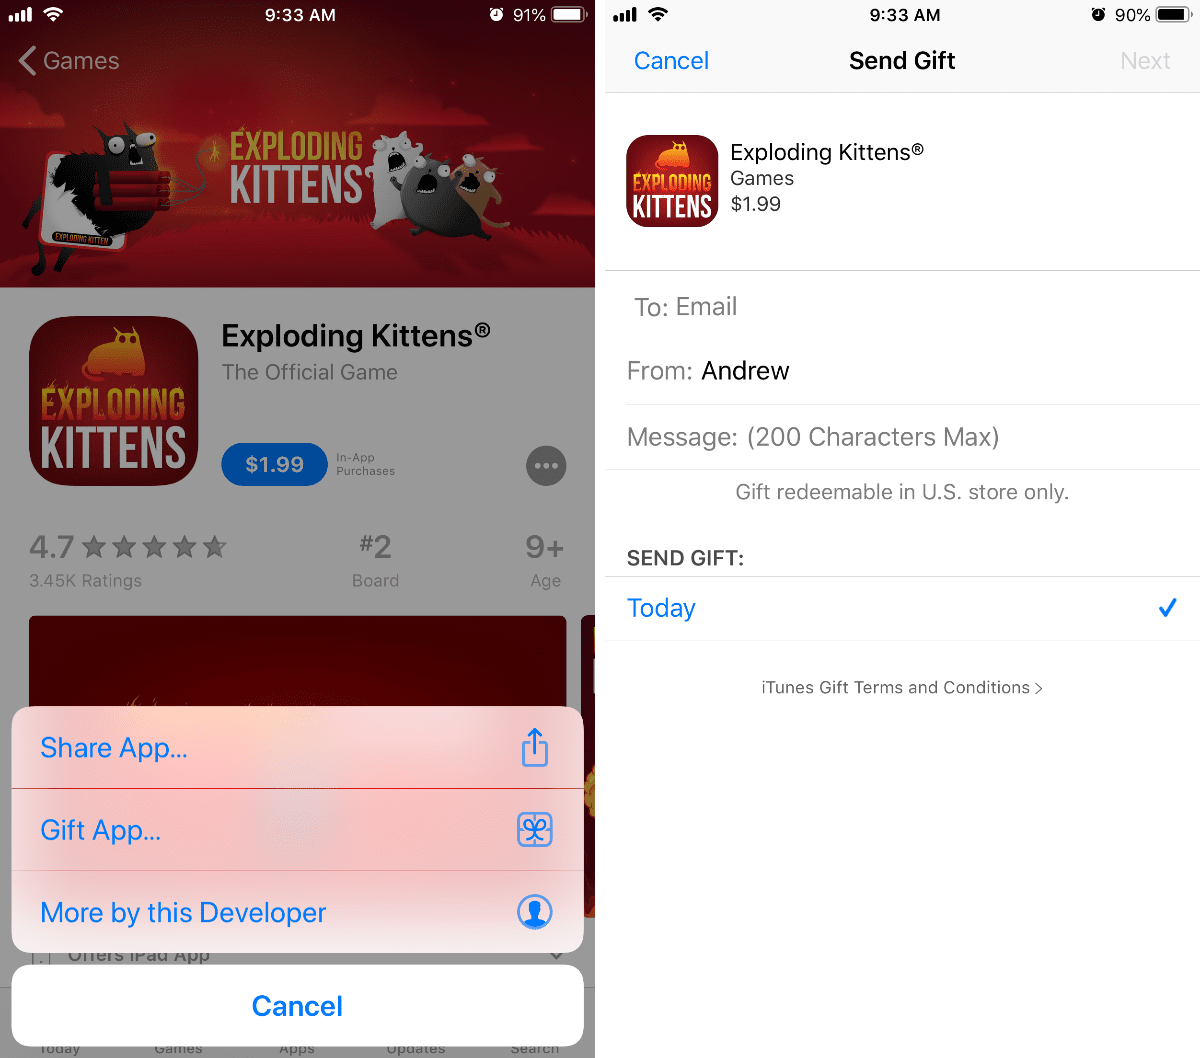 you can now gift In-App Purchases. gifting apps shown here